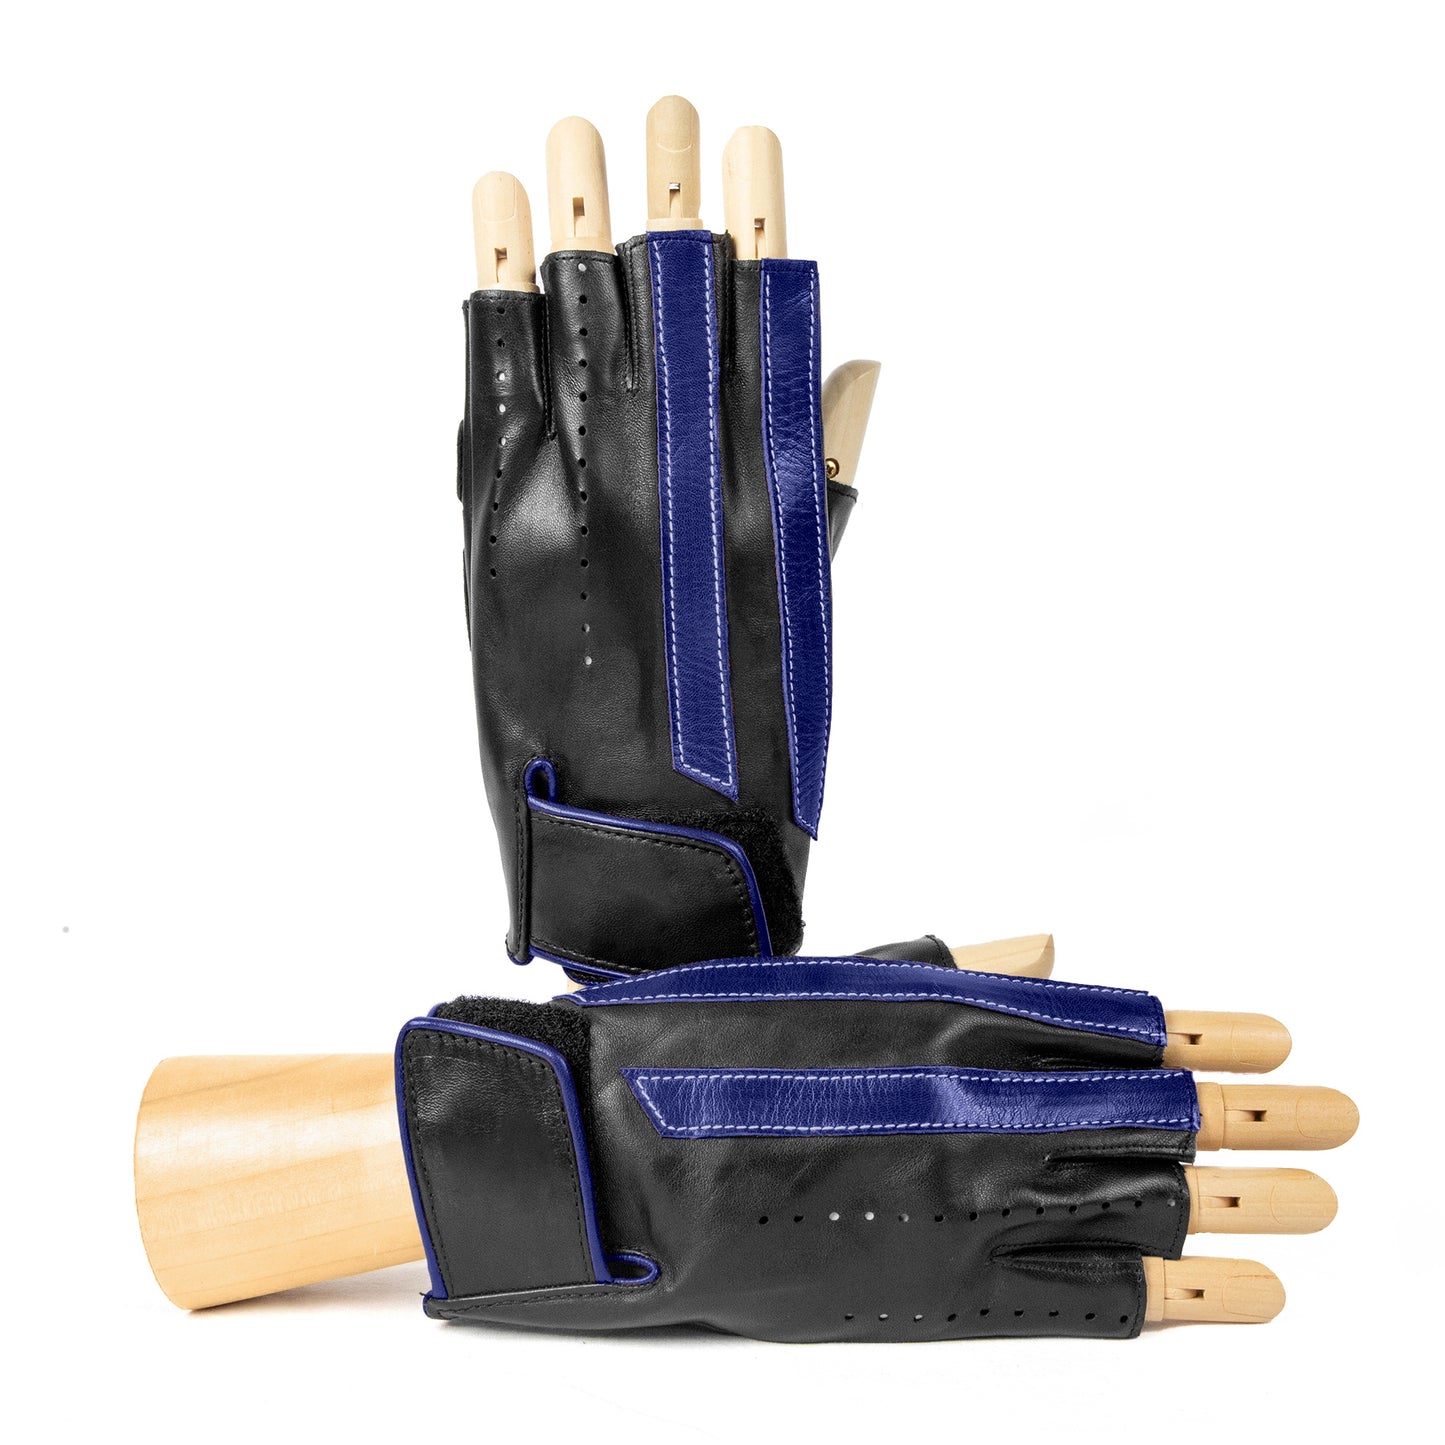 Men's unlined half fingers driving gloves in black nappa leather with blue leather strips